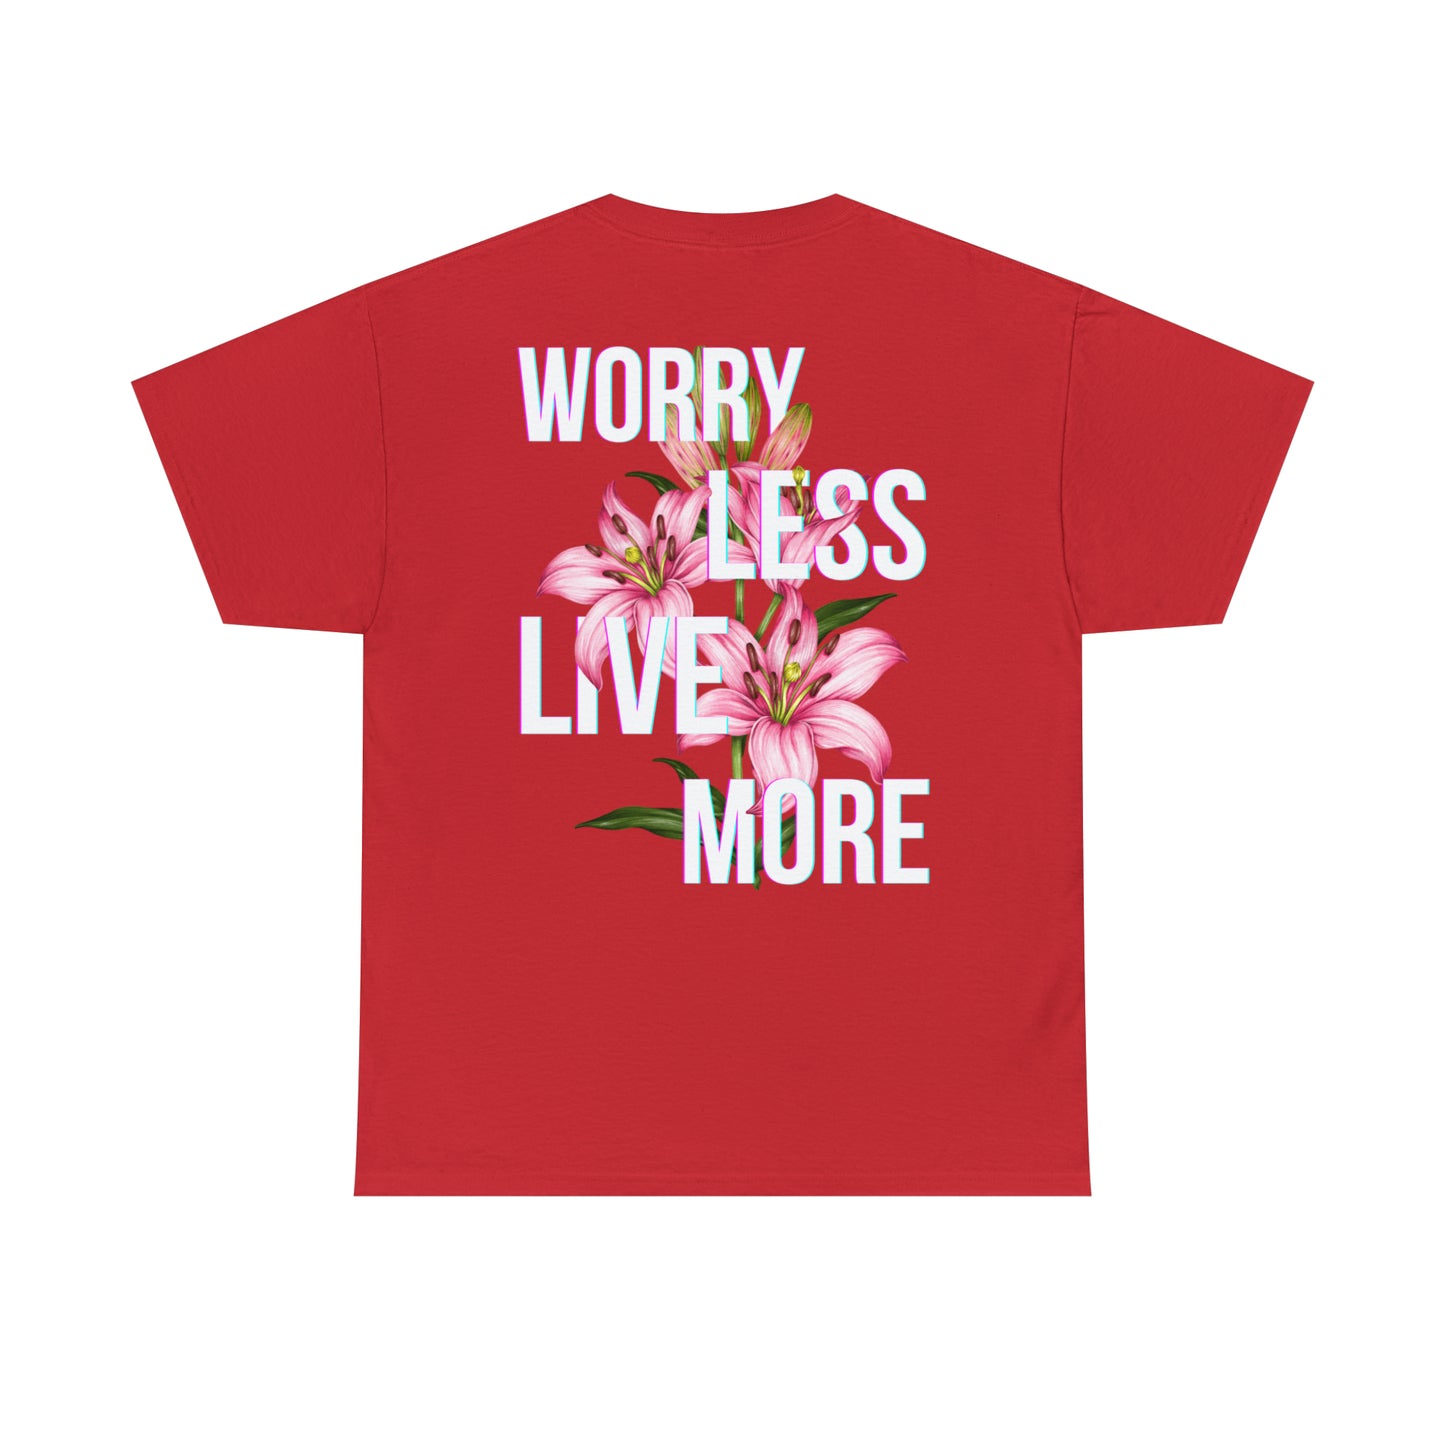 Worry Less Live More - T-shirt